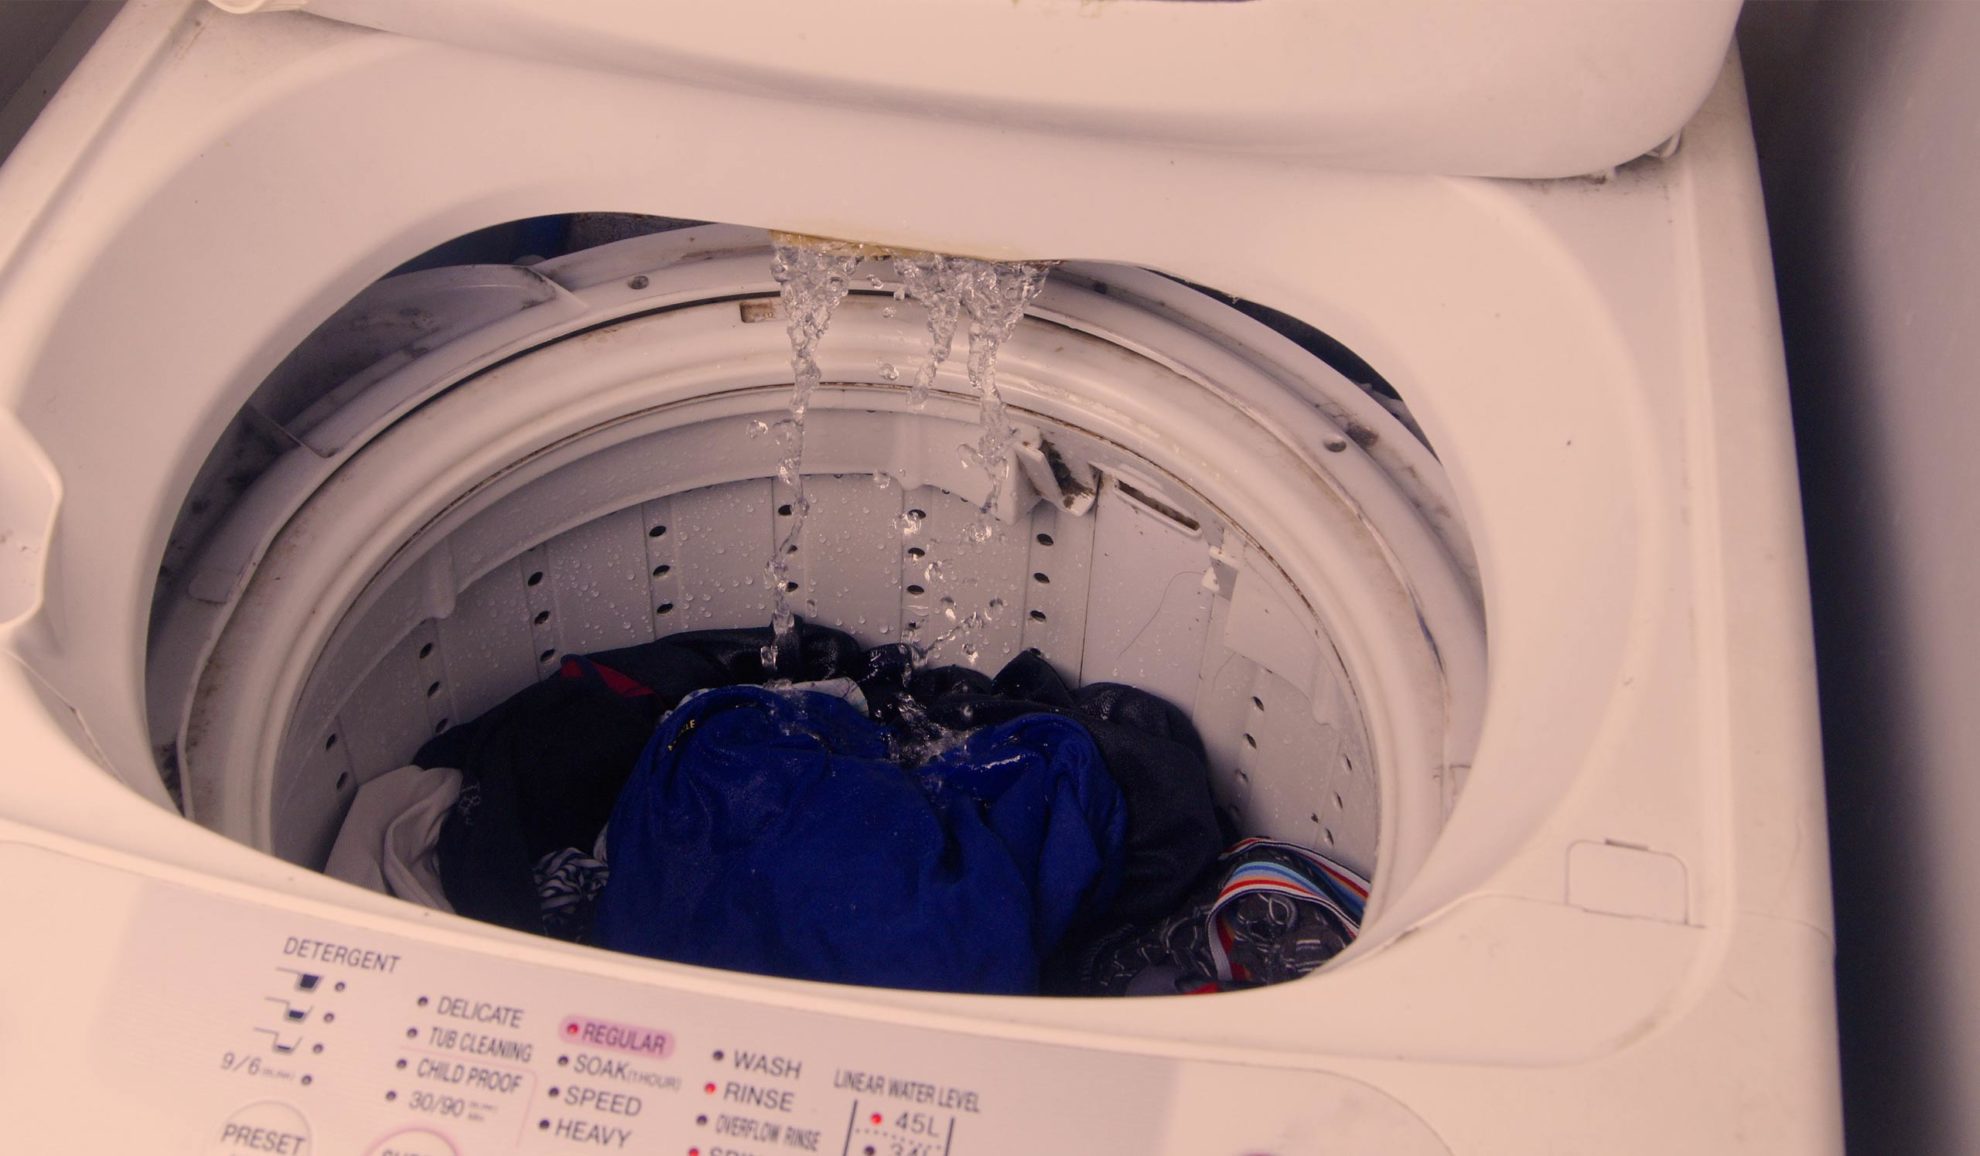 washer-machine-opened-with-clothes-inside-and-getting-filled-with-water-fort-collins-co